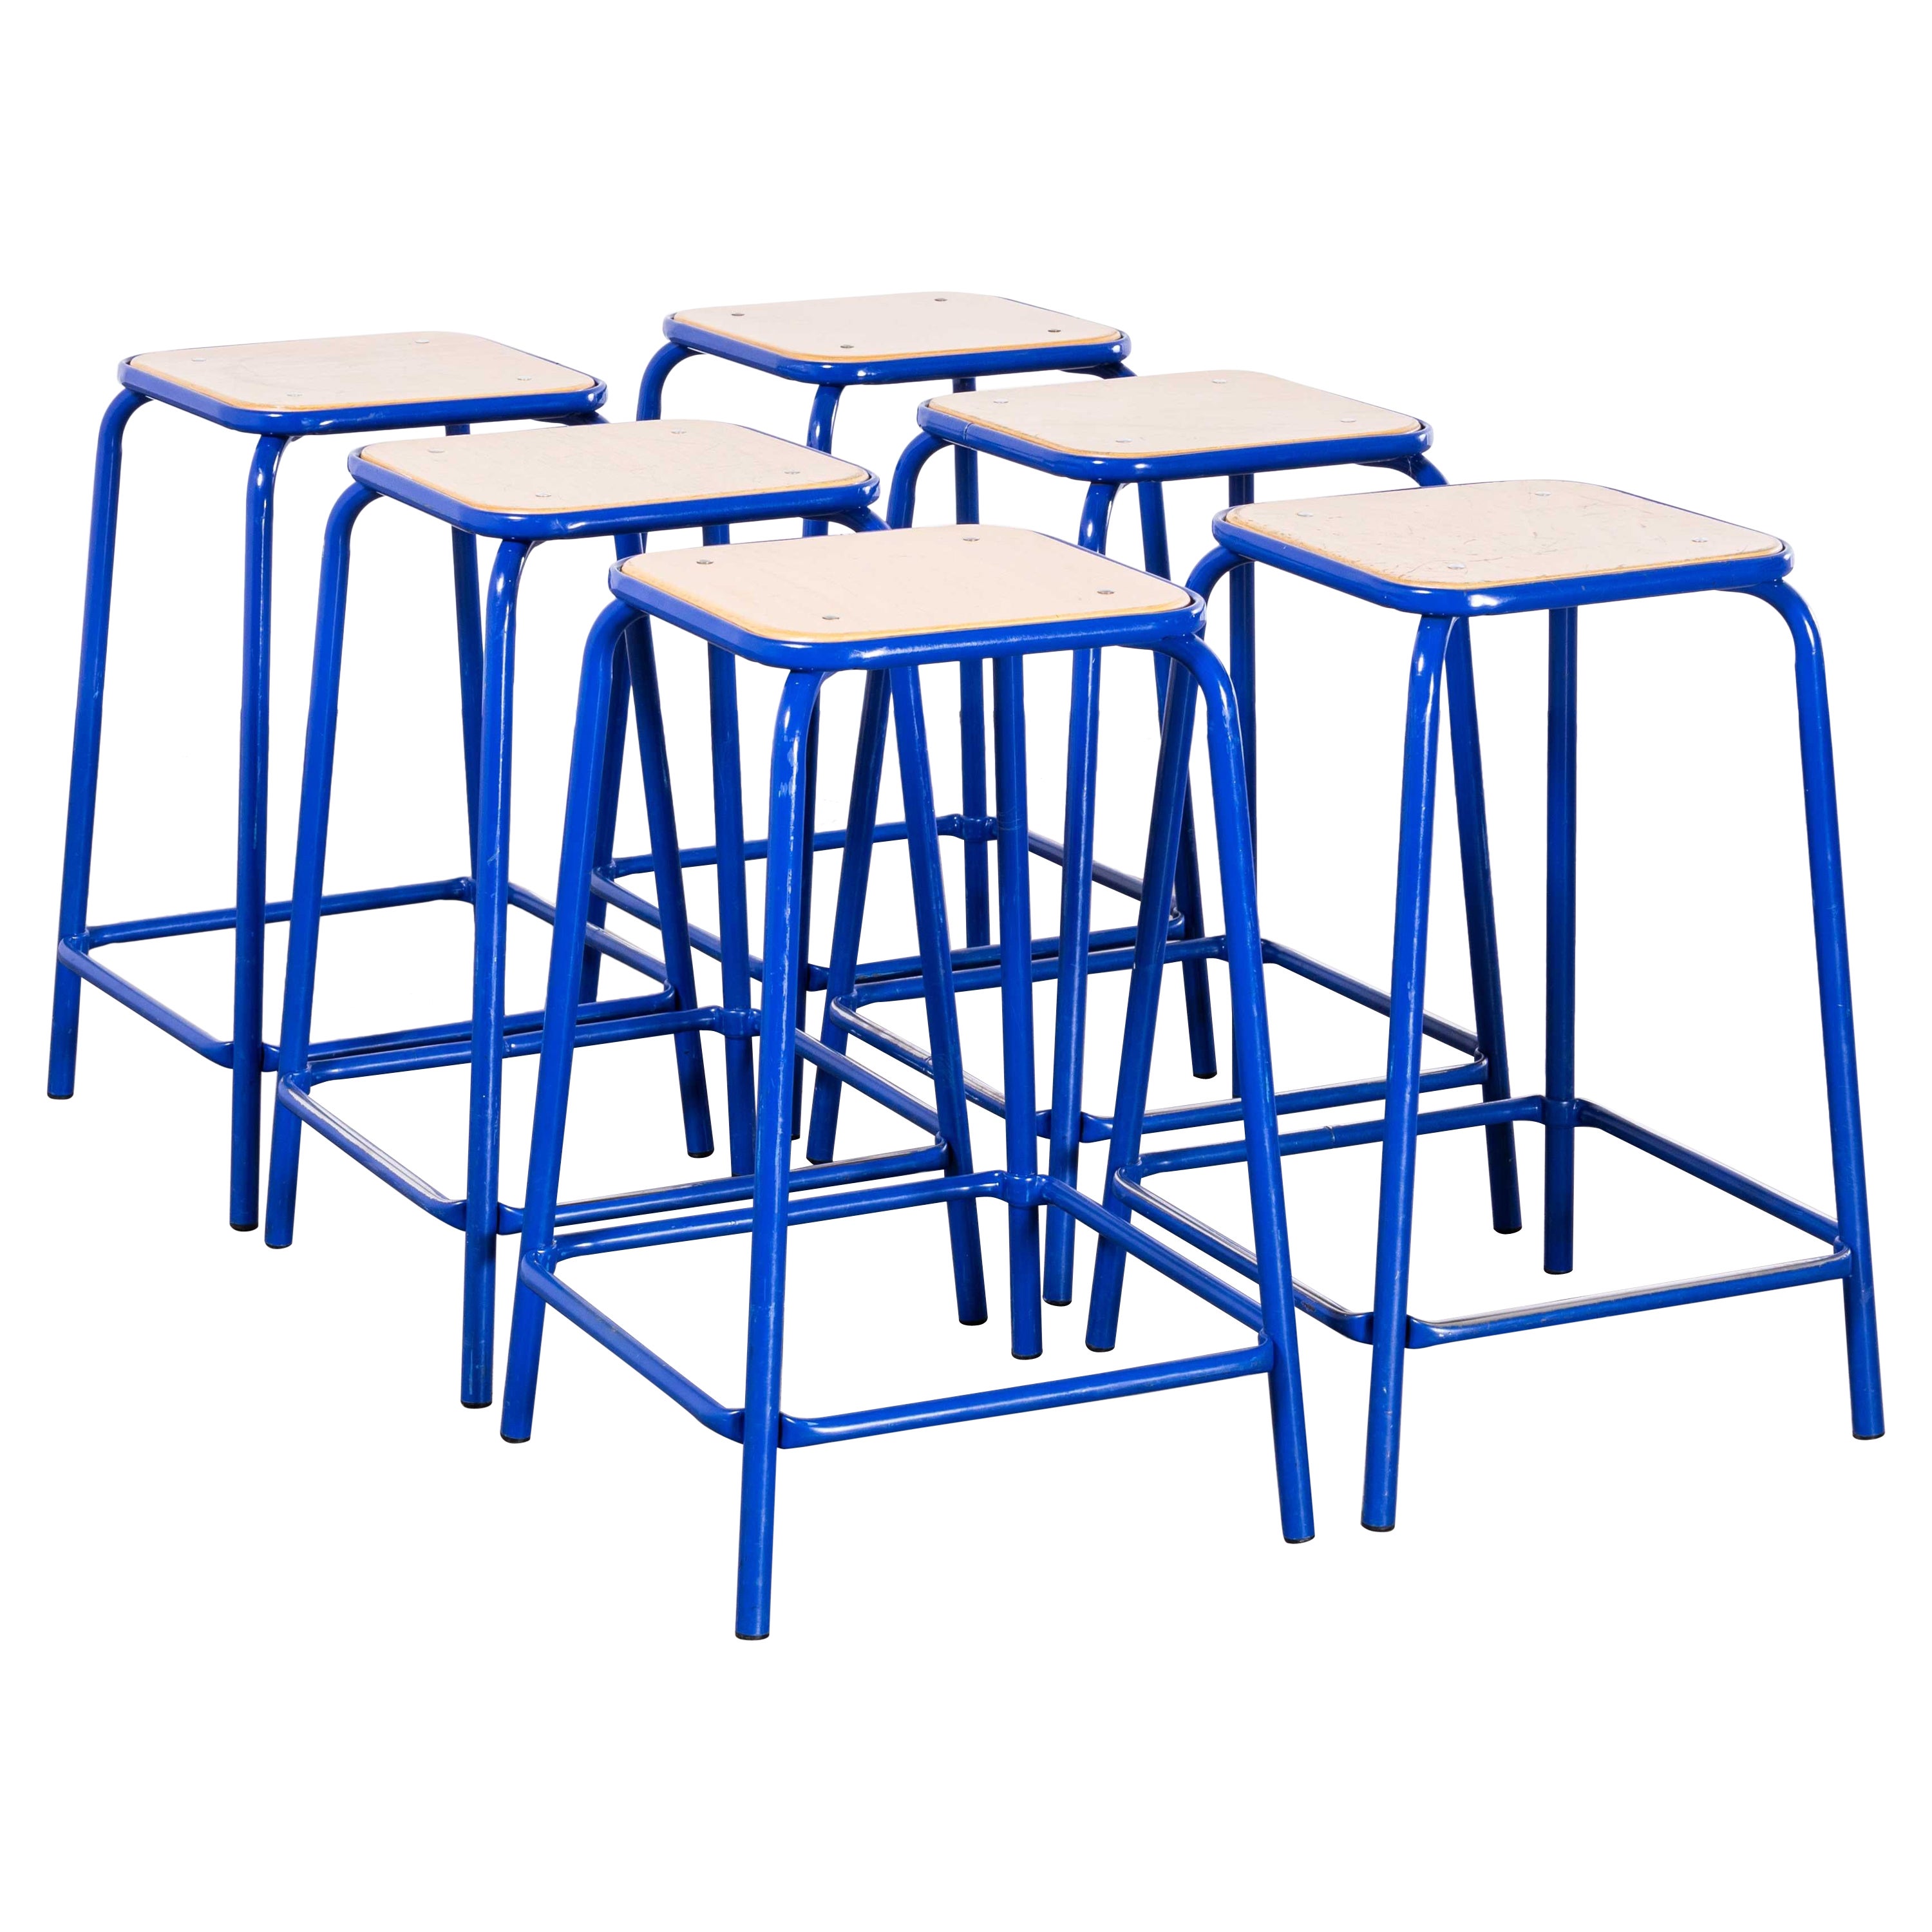 1970's French Bright Blue Laboratory Stools - Set Of Six For Sale